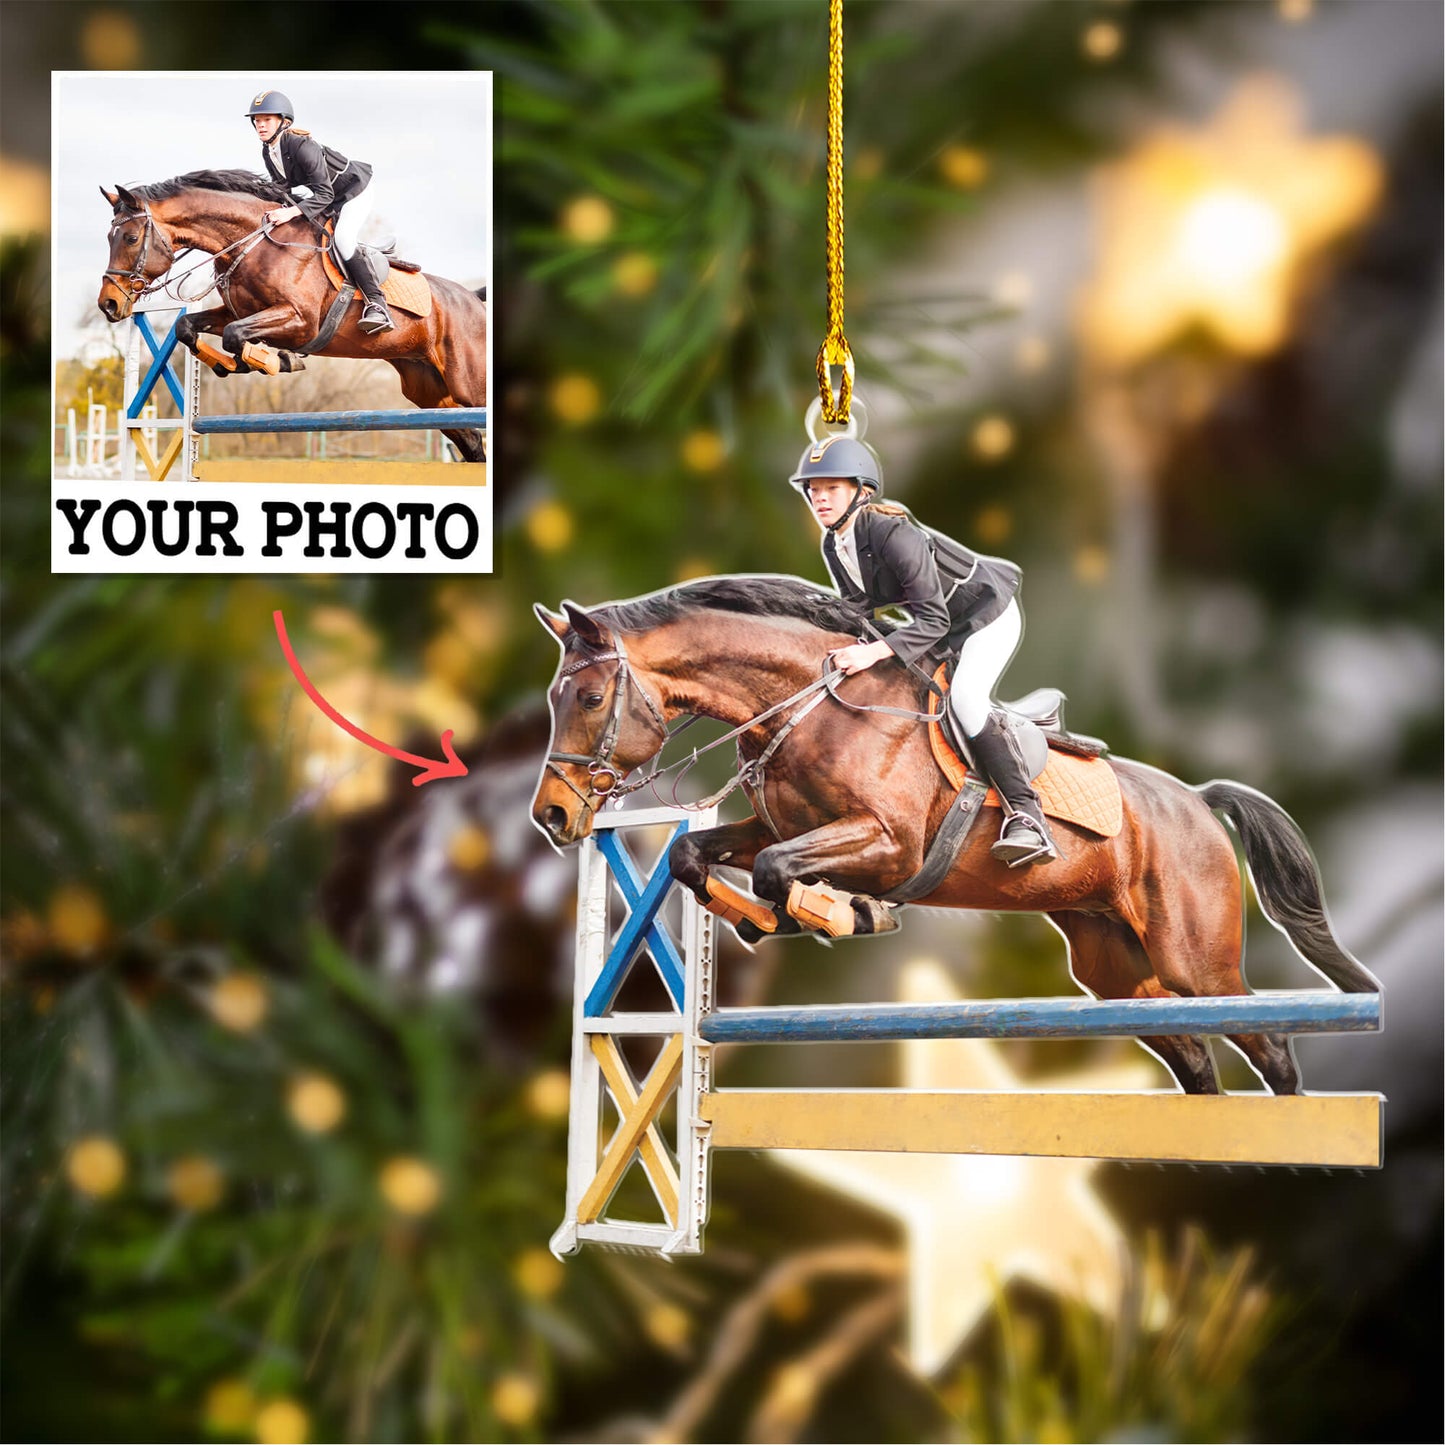 Personalized Double-Sided Acrylic Ornament - Horseback Riding Ornaments - Christmas Gift for Friends and Family